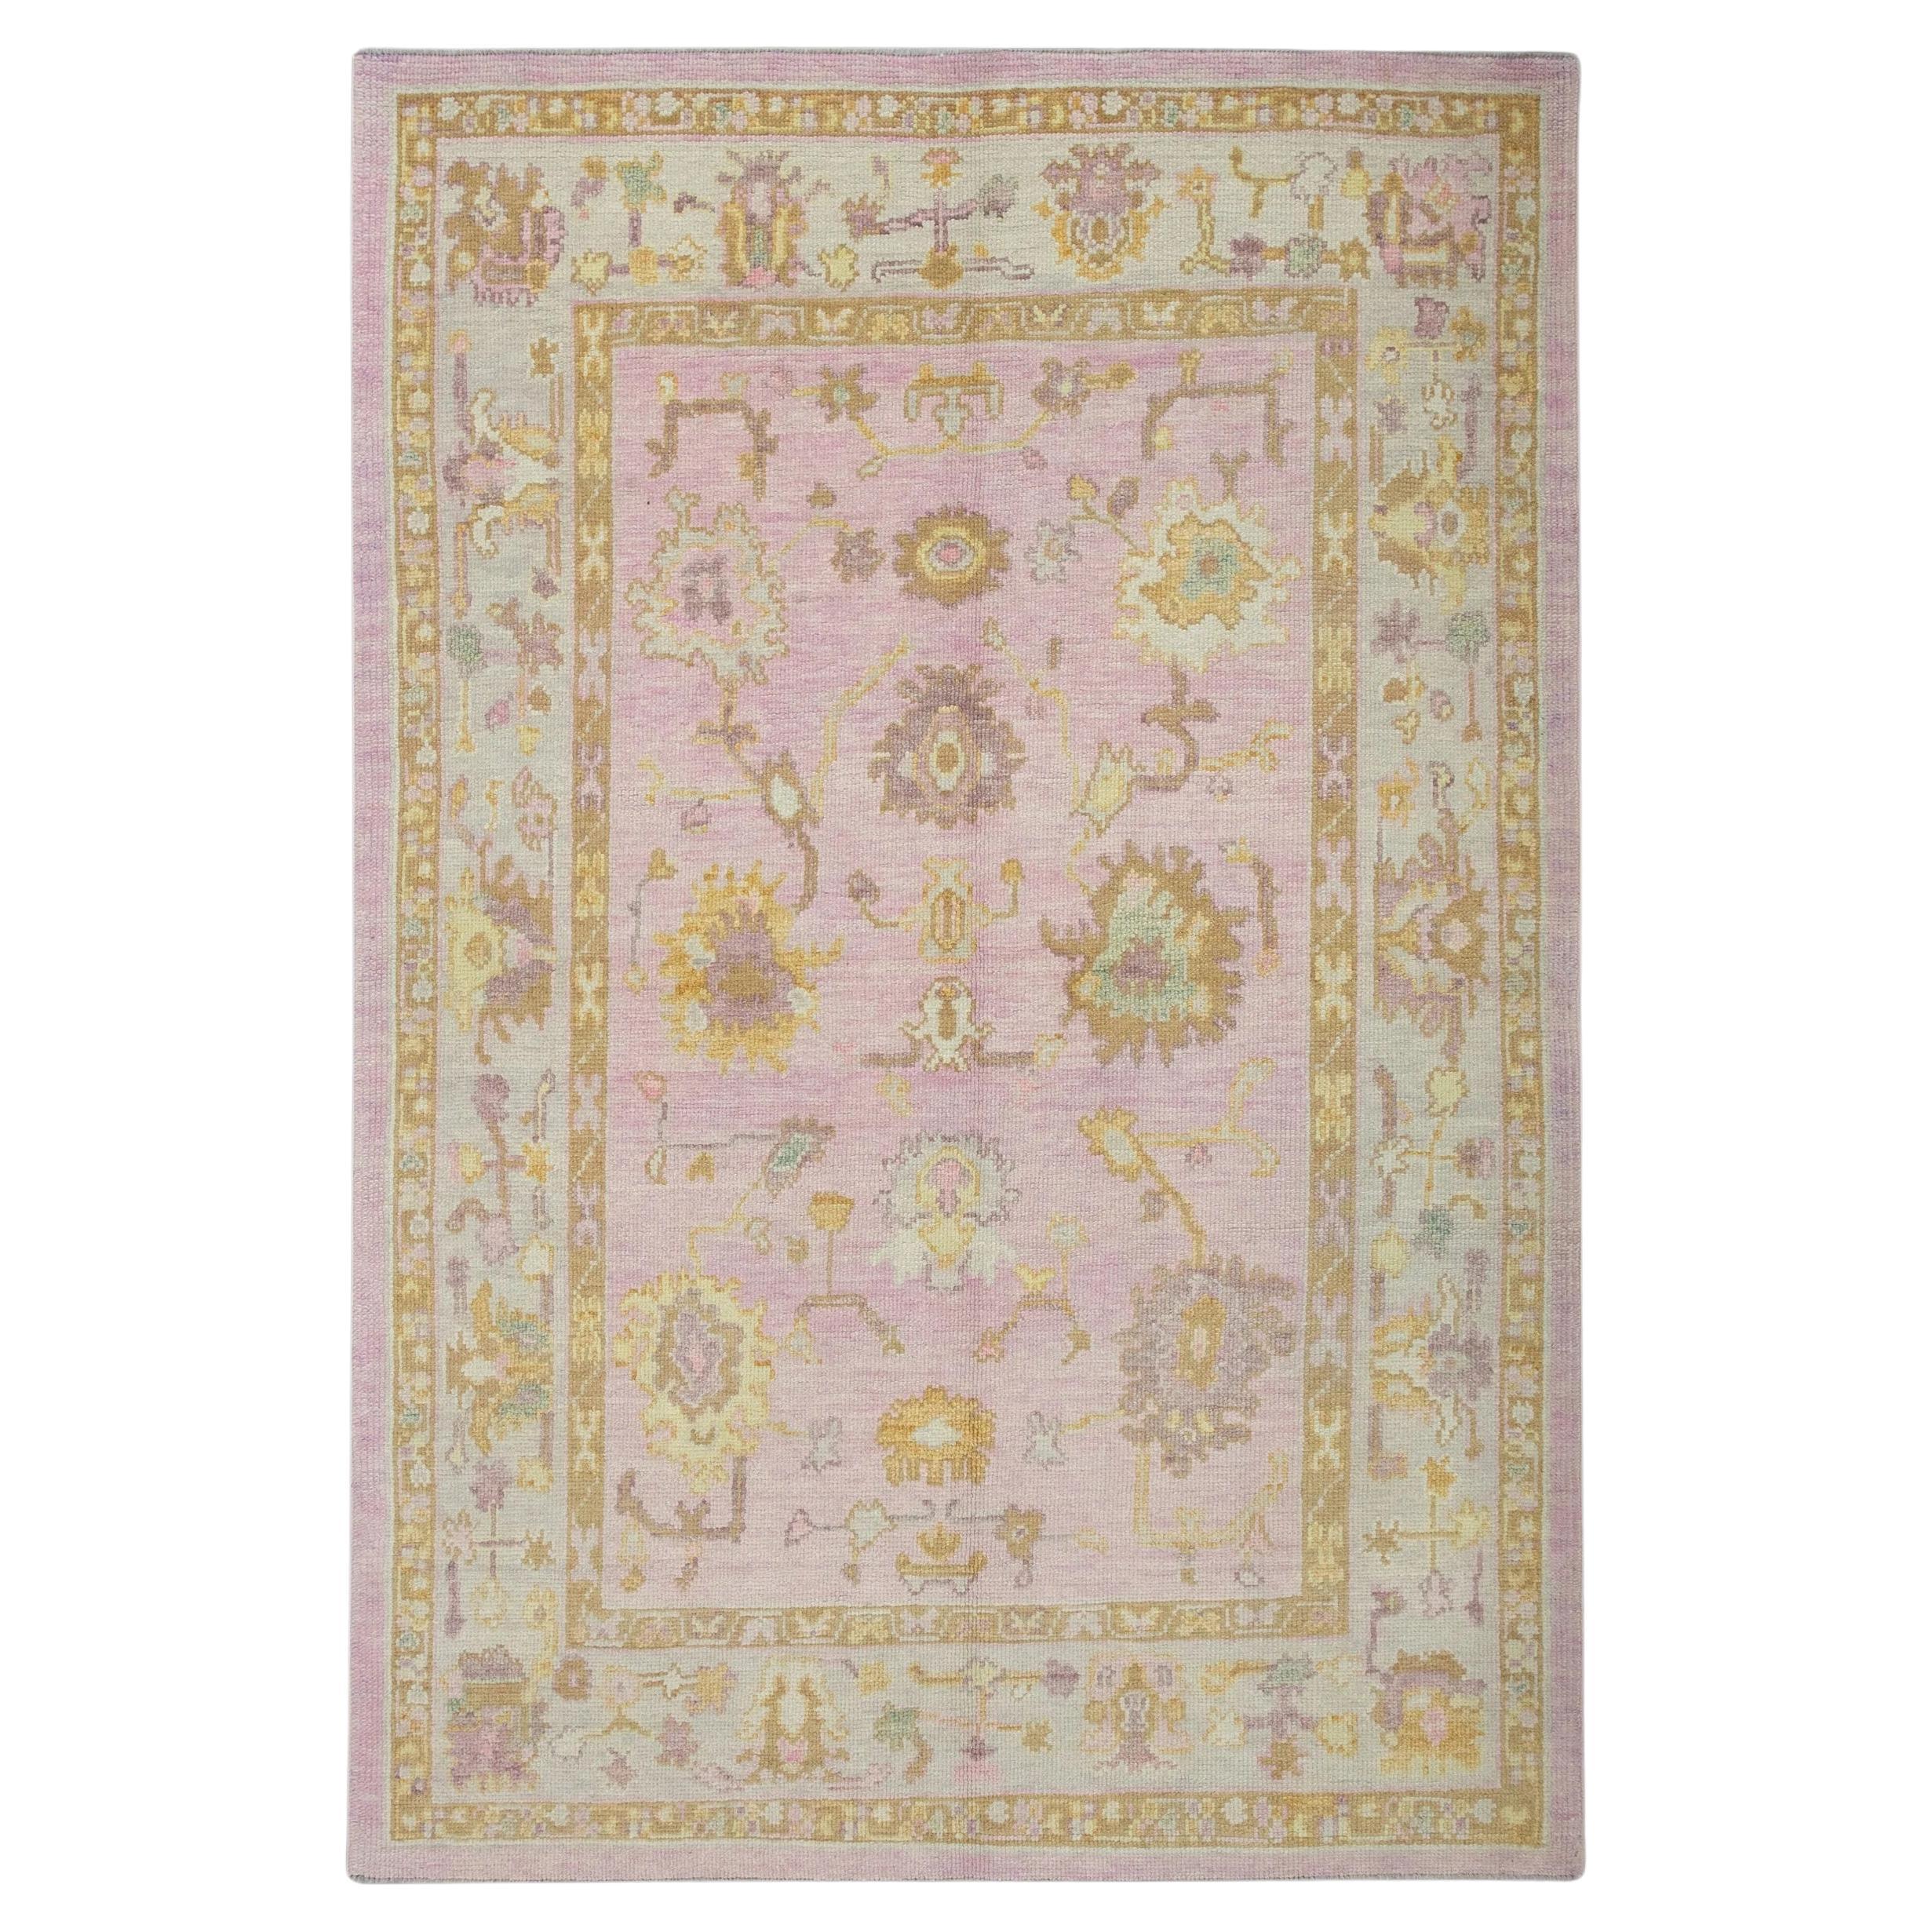 Floral Handwoven Wool Turkish Oushak Rug in Soft Pink and Yellow 5'3" x 7'2" For Sale